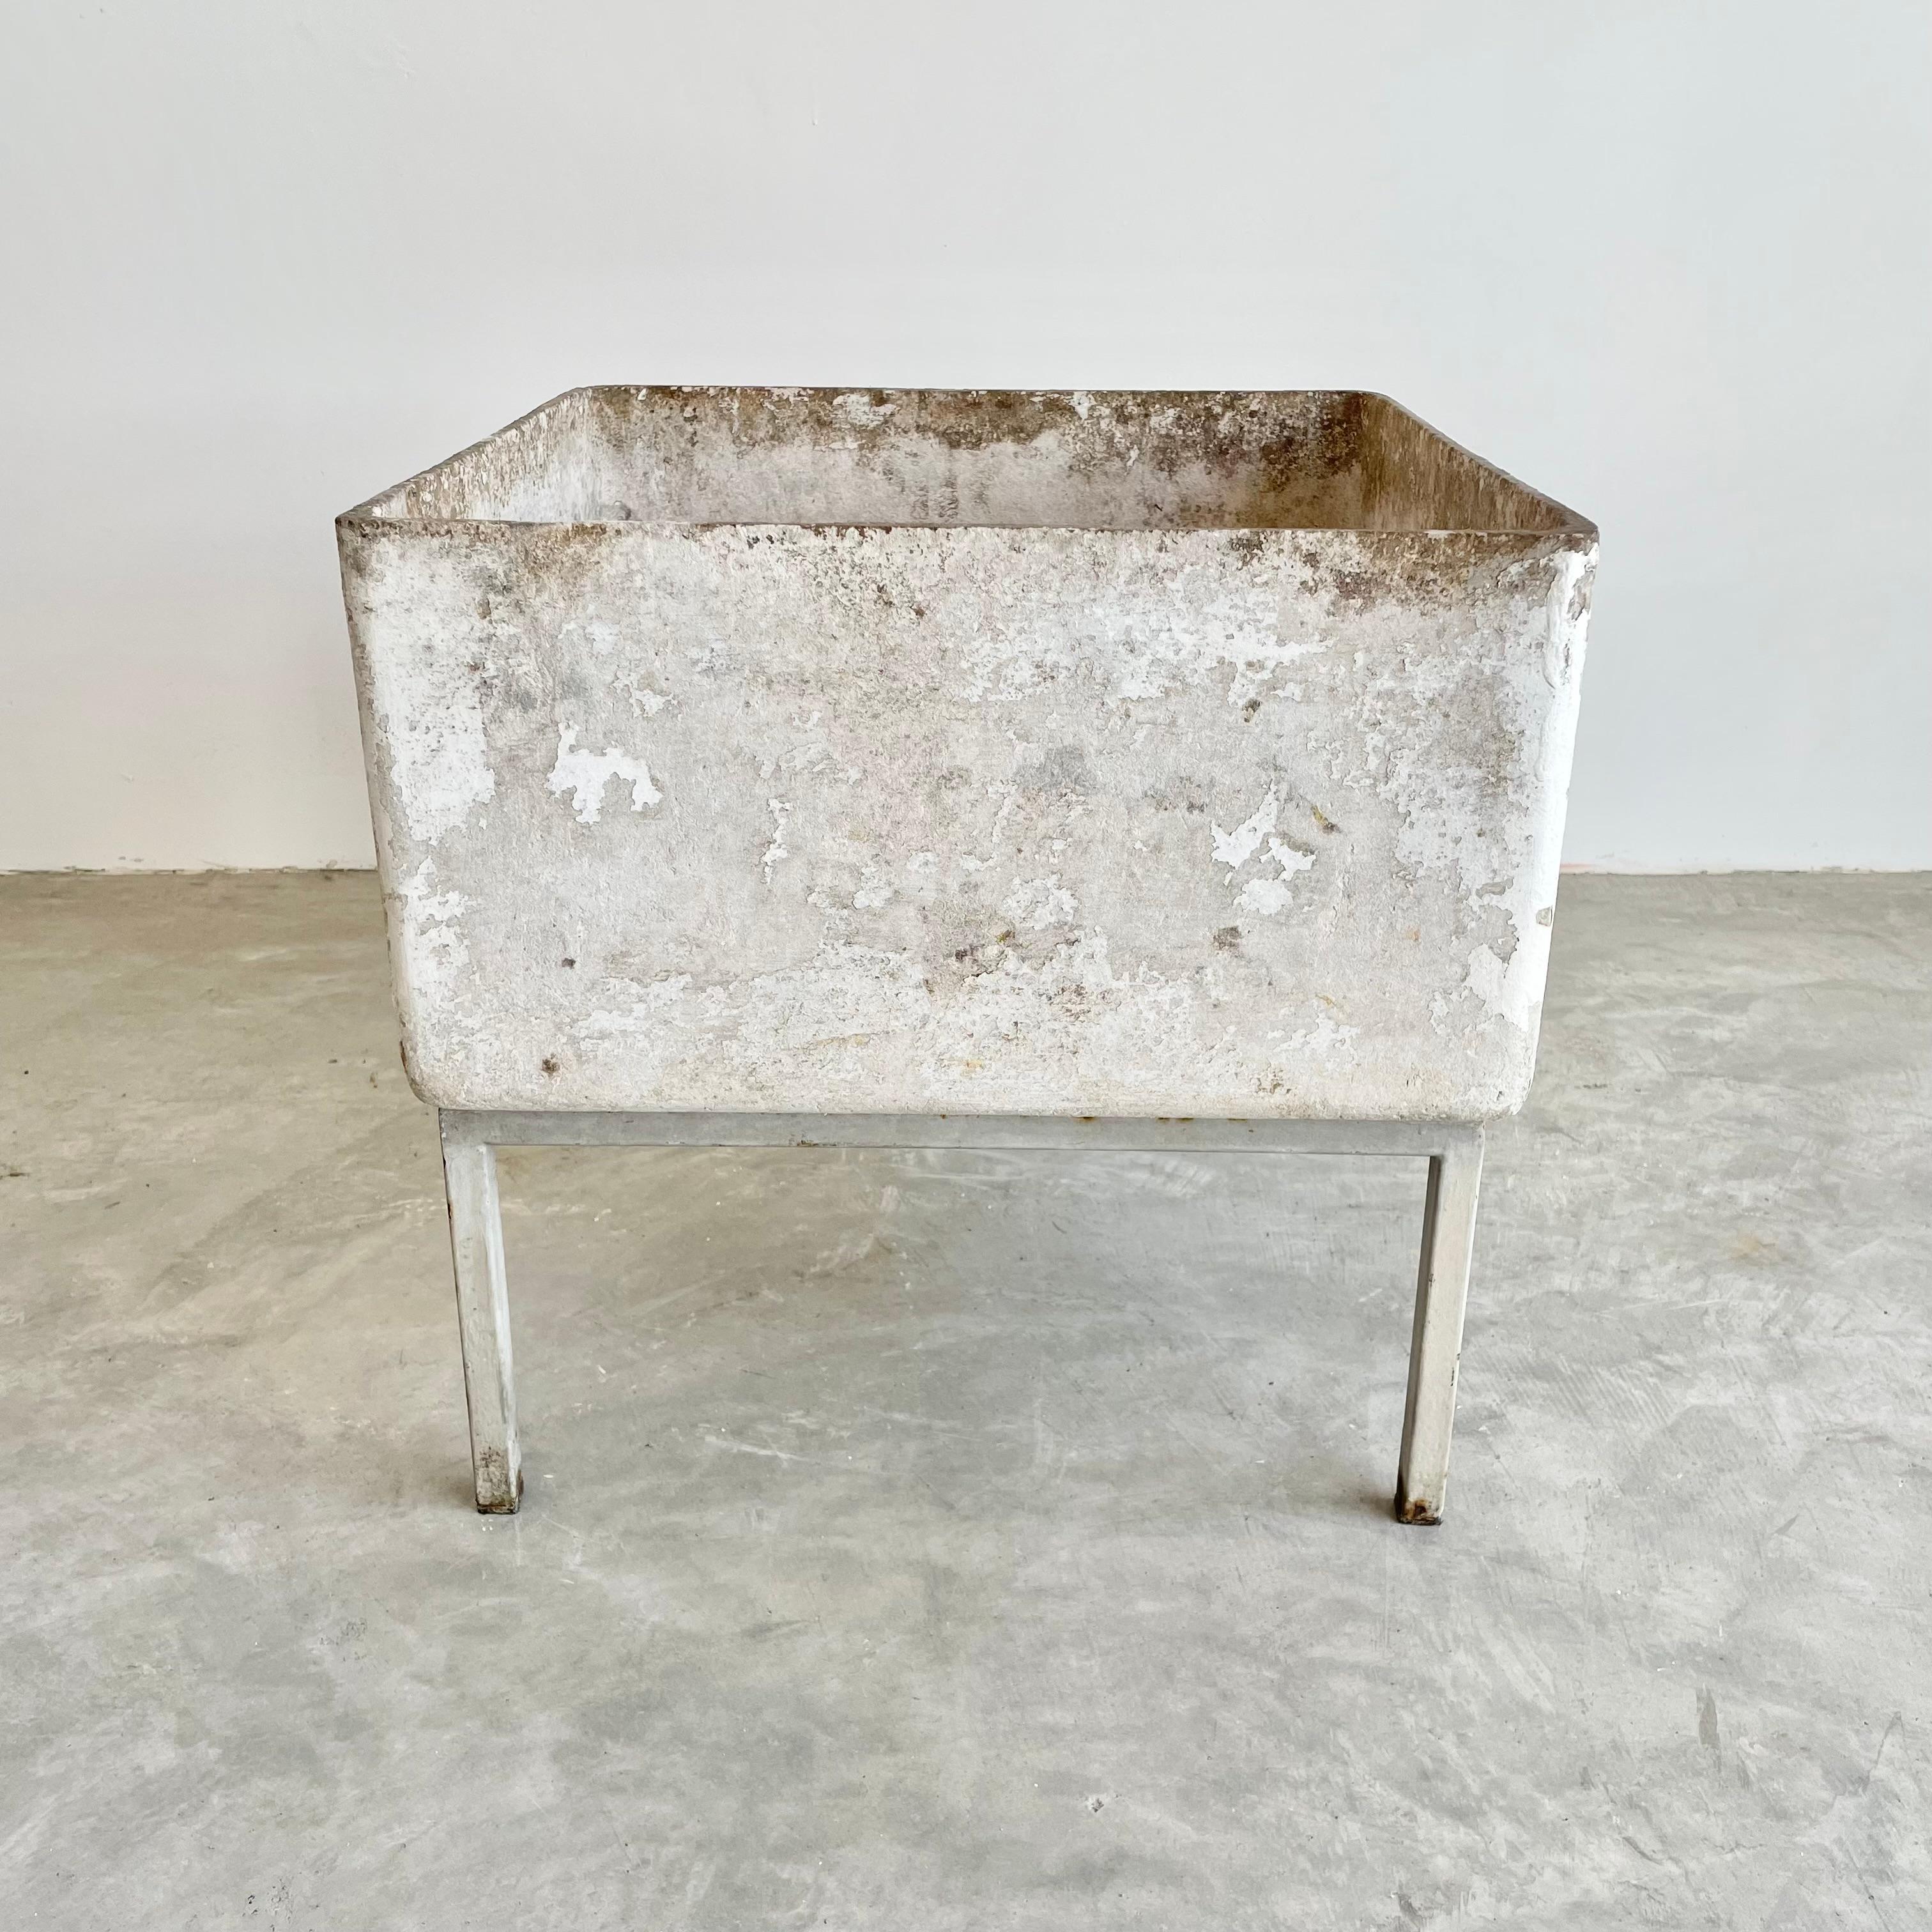 Late 20th Century Willy Guhl Concrete Box Planter on Metal Stand, 1970s Switzerland For Sale